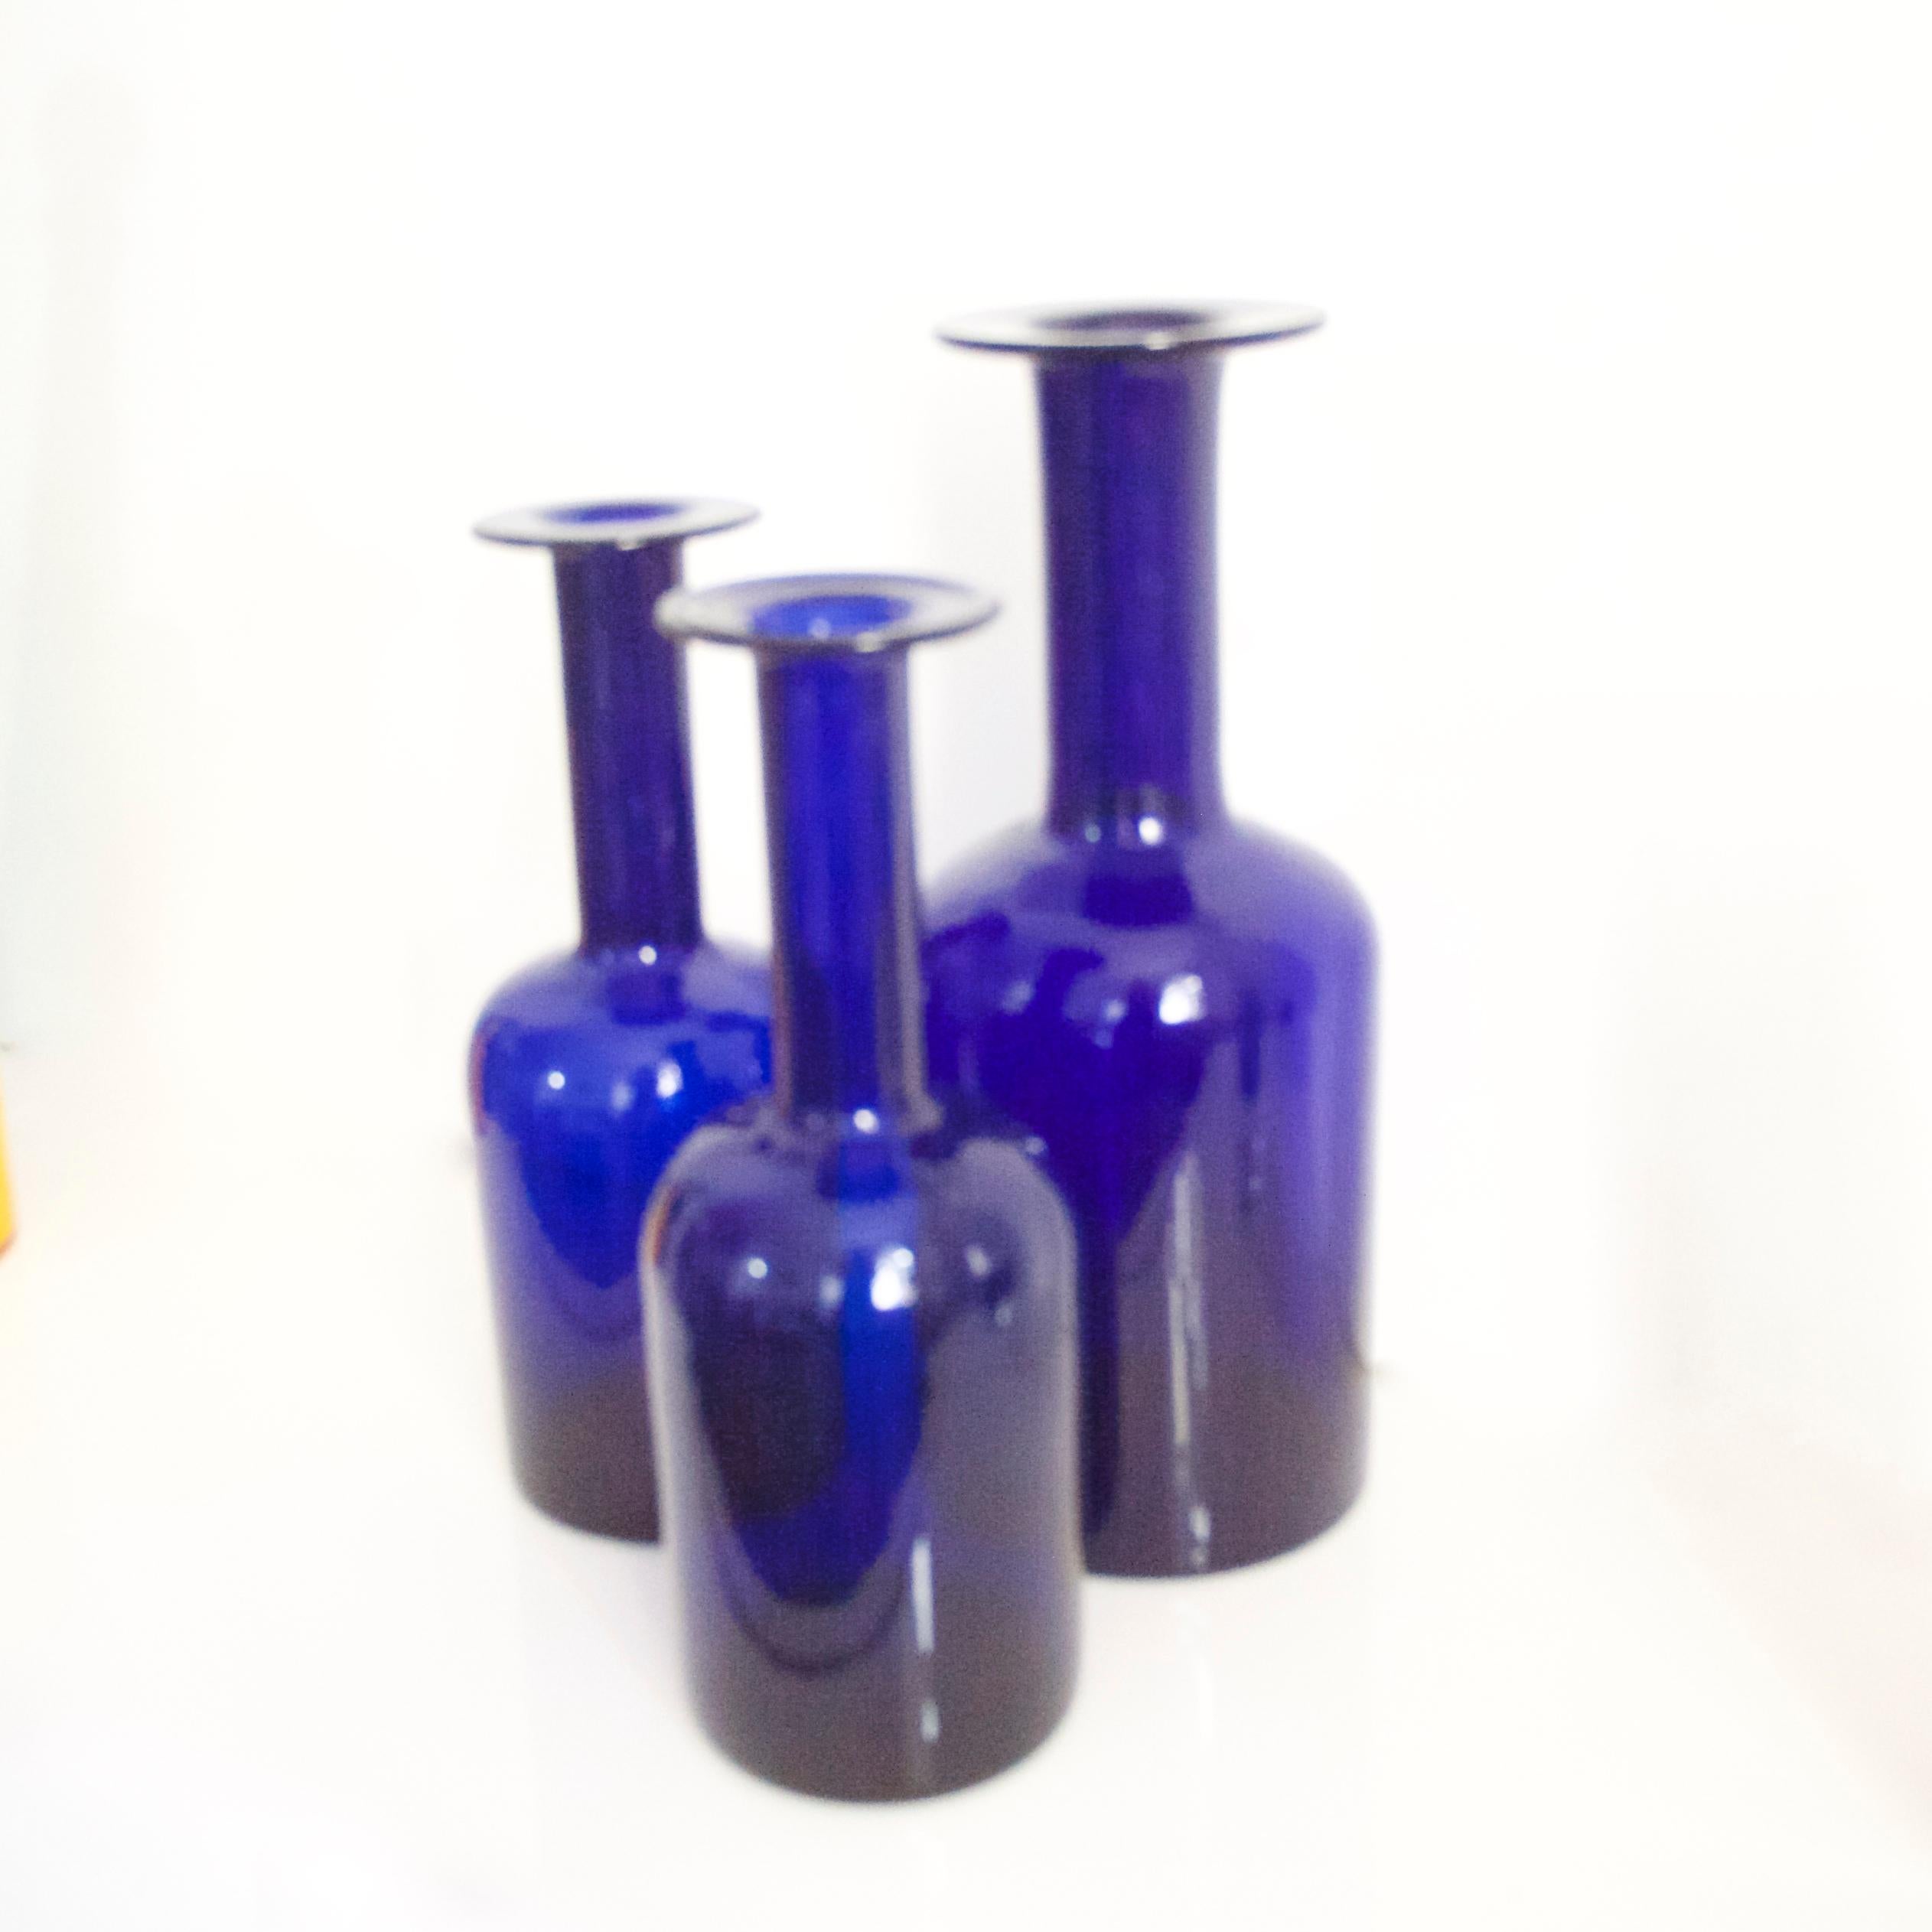 A three-piece pair of cobalt blue Gulvases by Otto Brauer based on a design by Per Lutken in 1958 for Holmegaard Kastrup

The larger vase is 30 cms in height the small 25 cms.